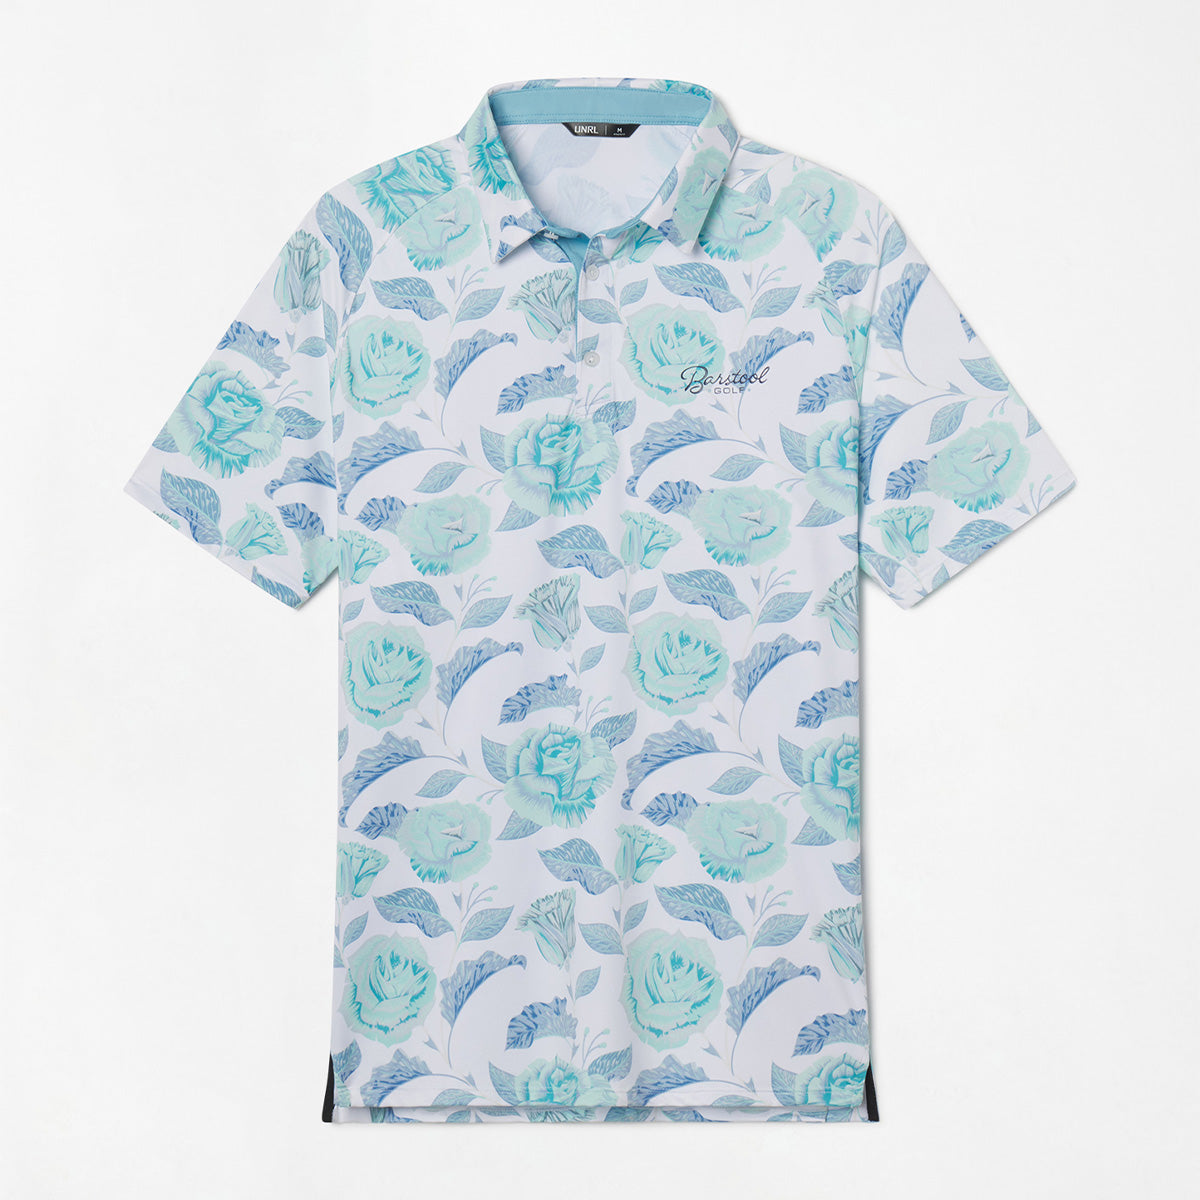 UNRL x Barstool Golf Floral Polo-Polos-Fore Play-Barstool Sports